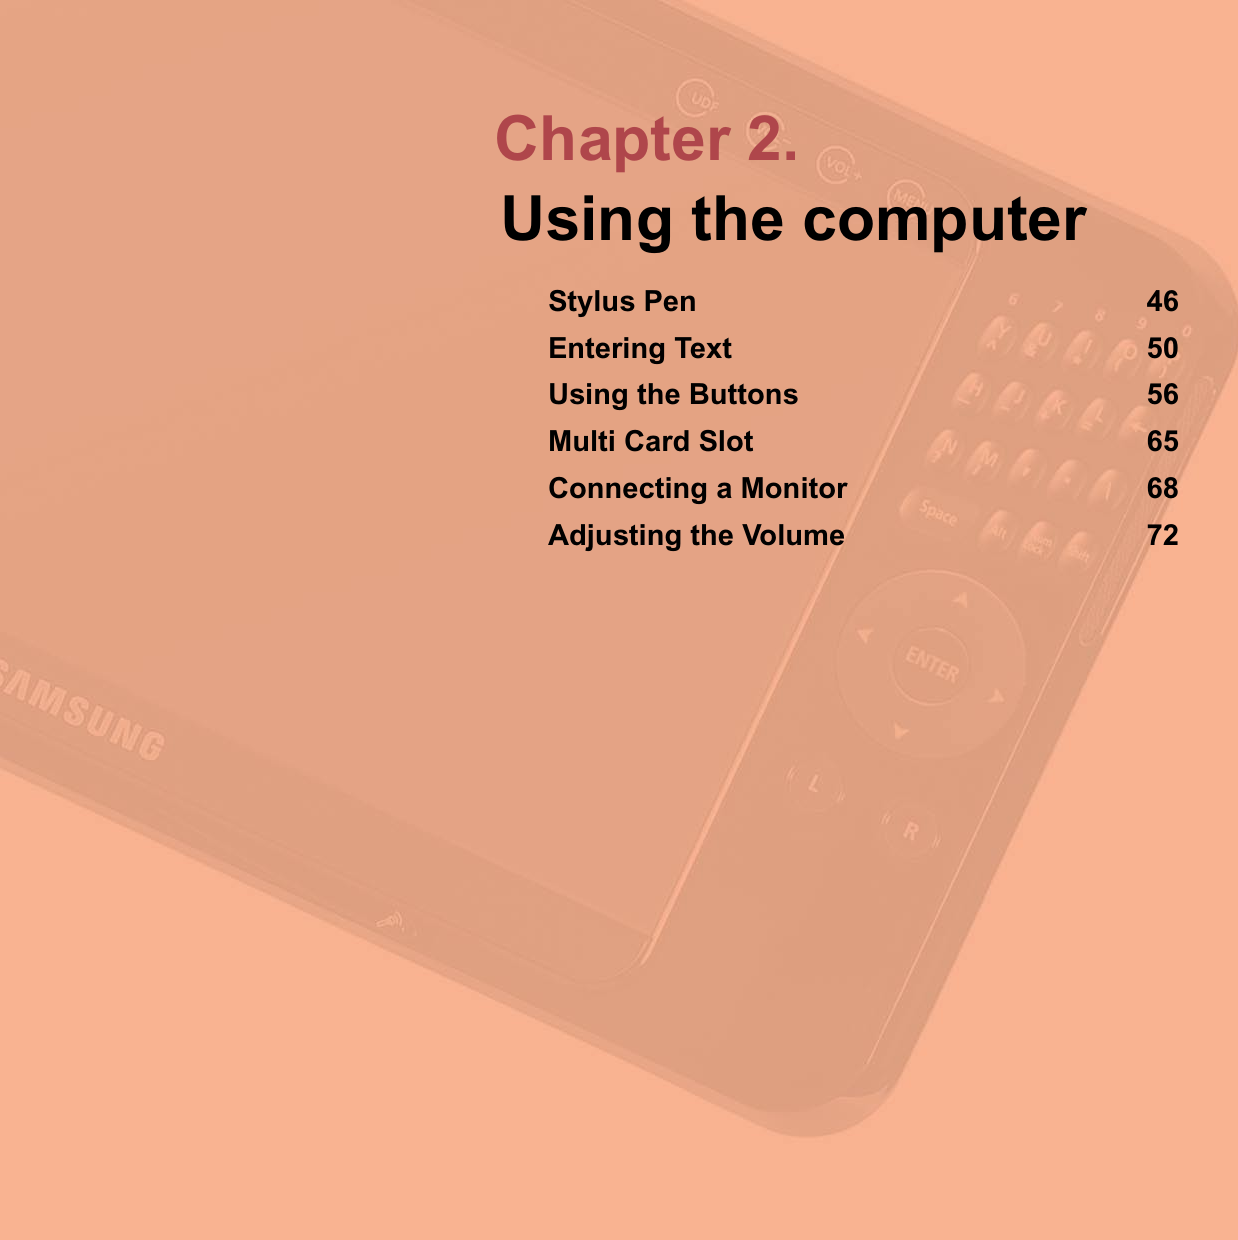 Chapter 2.Using the computerStylus Pen 46Entering Text 50Using the Buttons 56Multi Card Slot 65Connecting a Monitor 68Adjusting the Volume 72